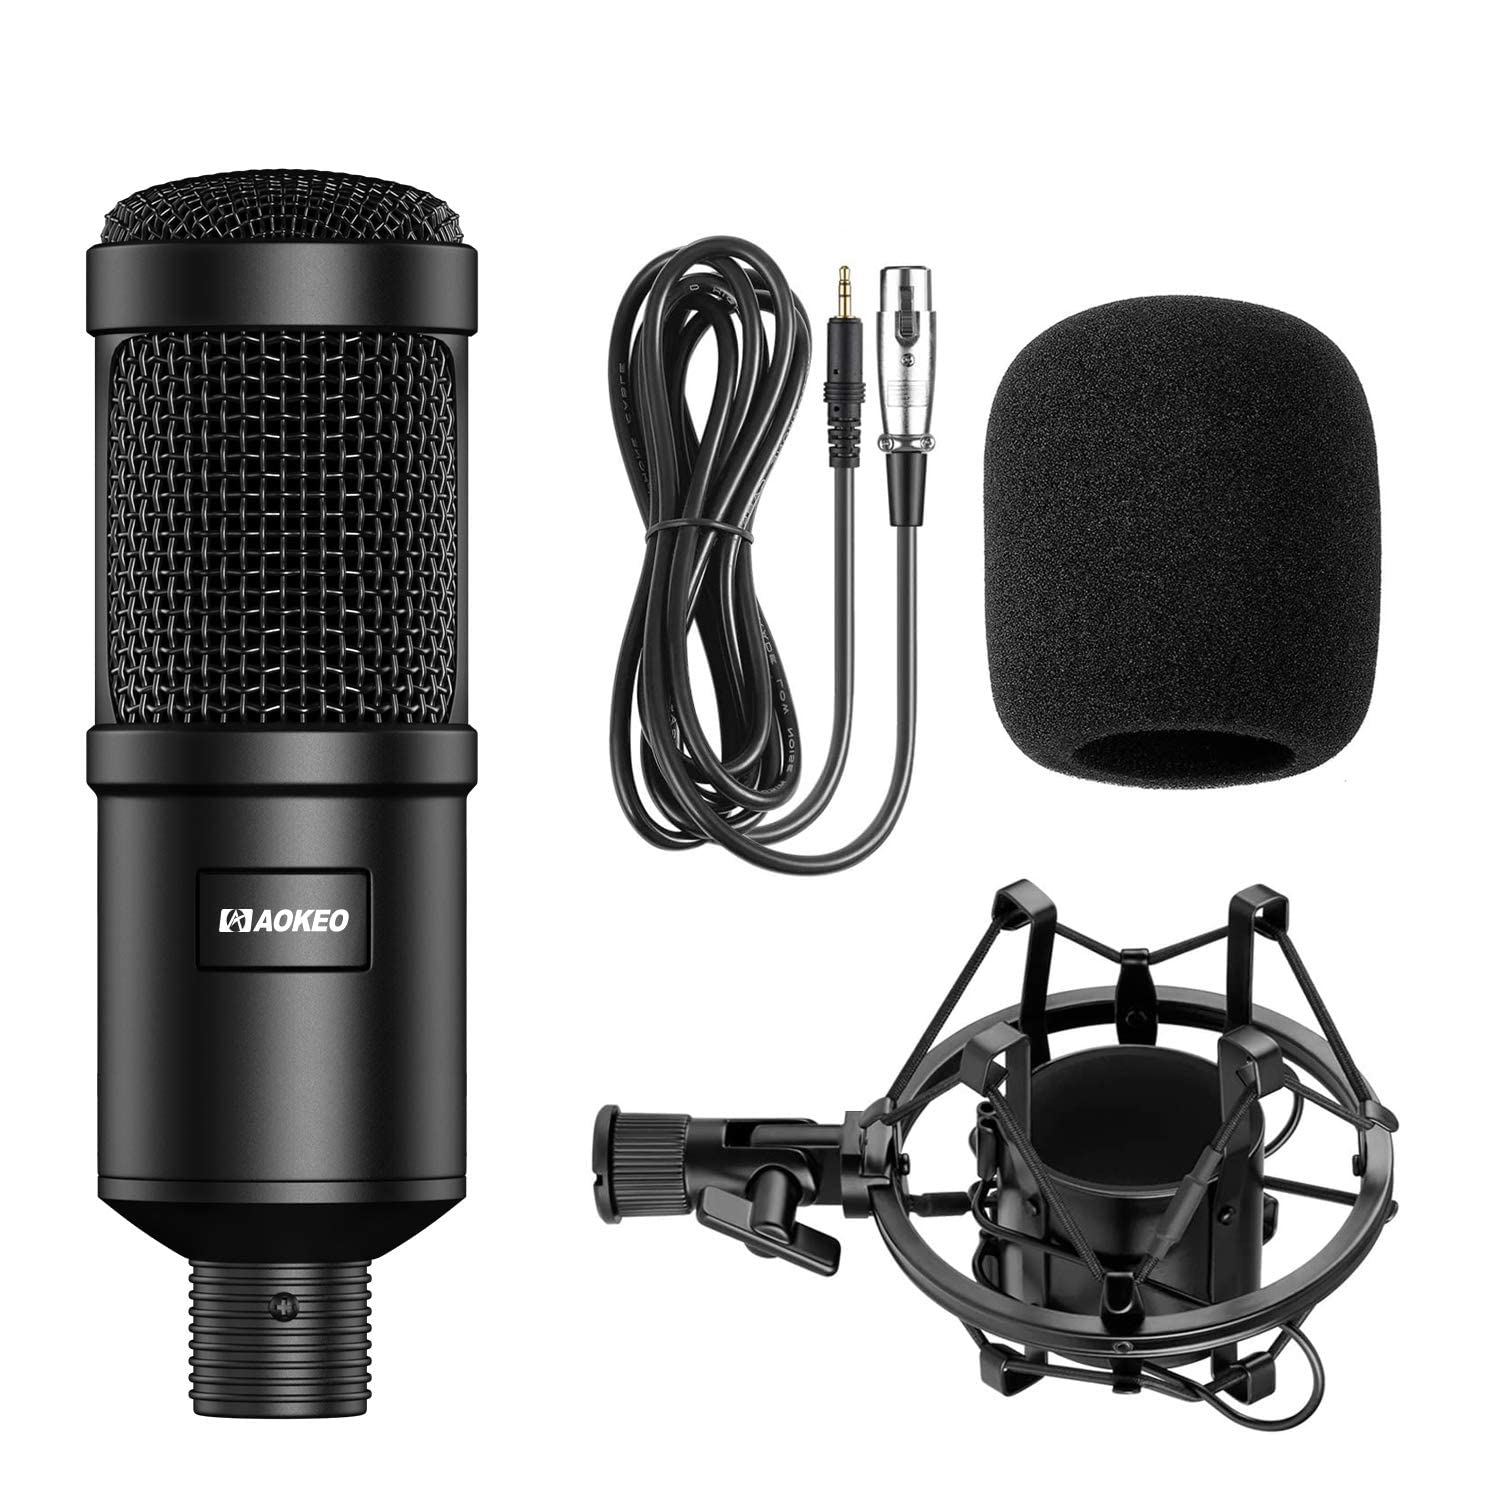 Mua Aokeo AK-60 Professional Condenser Microphone, Music Studio MIC Podcast Recording  Microphone Kit with Stand Shock Mount for PC Laptop Computer Broadcasting  YouTube Vlogging Skype Chatting Gaming trên Amazon Mỹ chính hãng